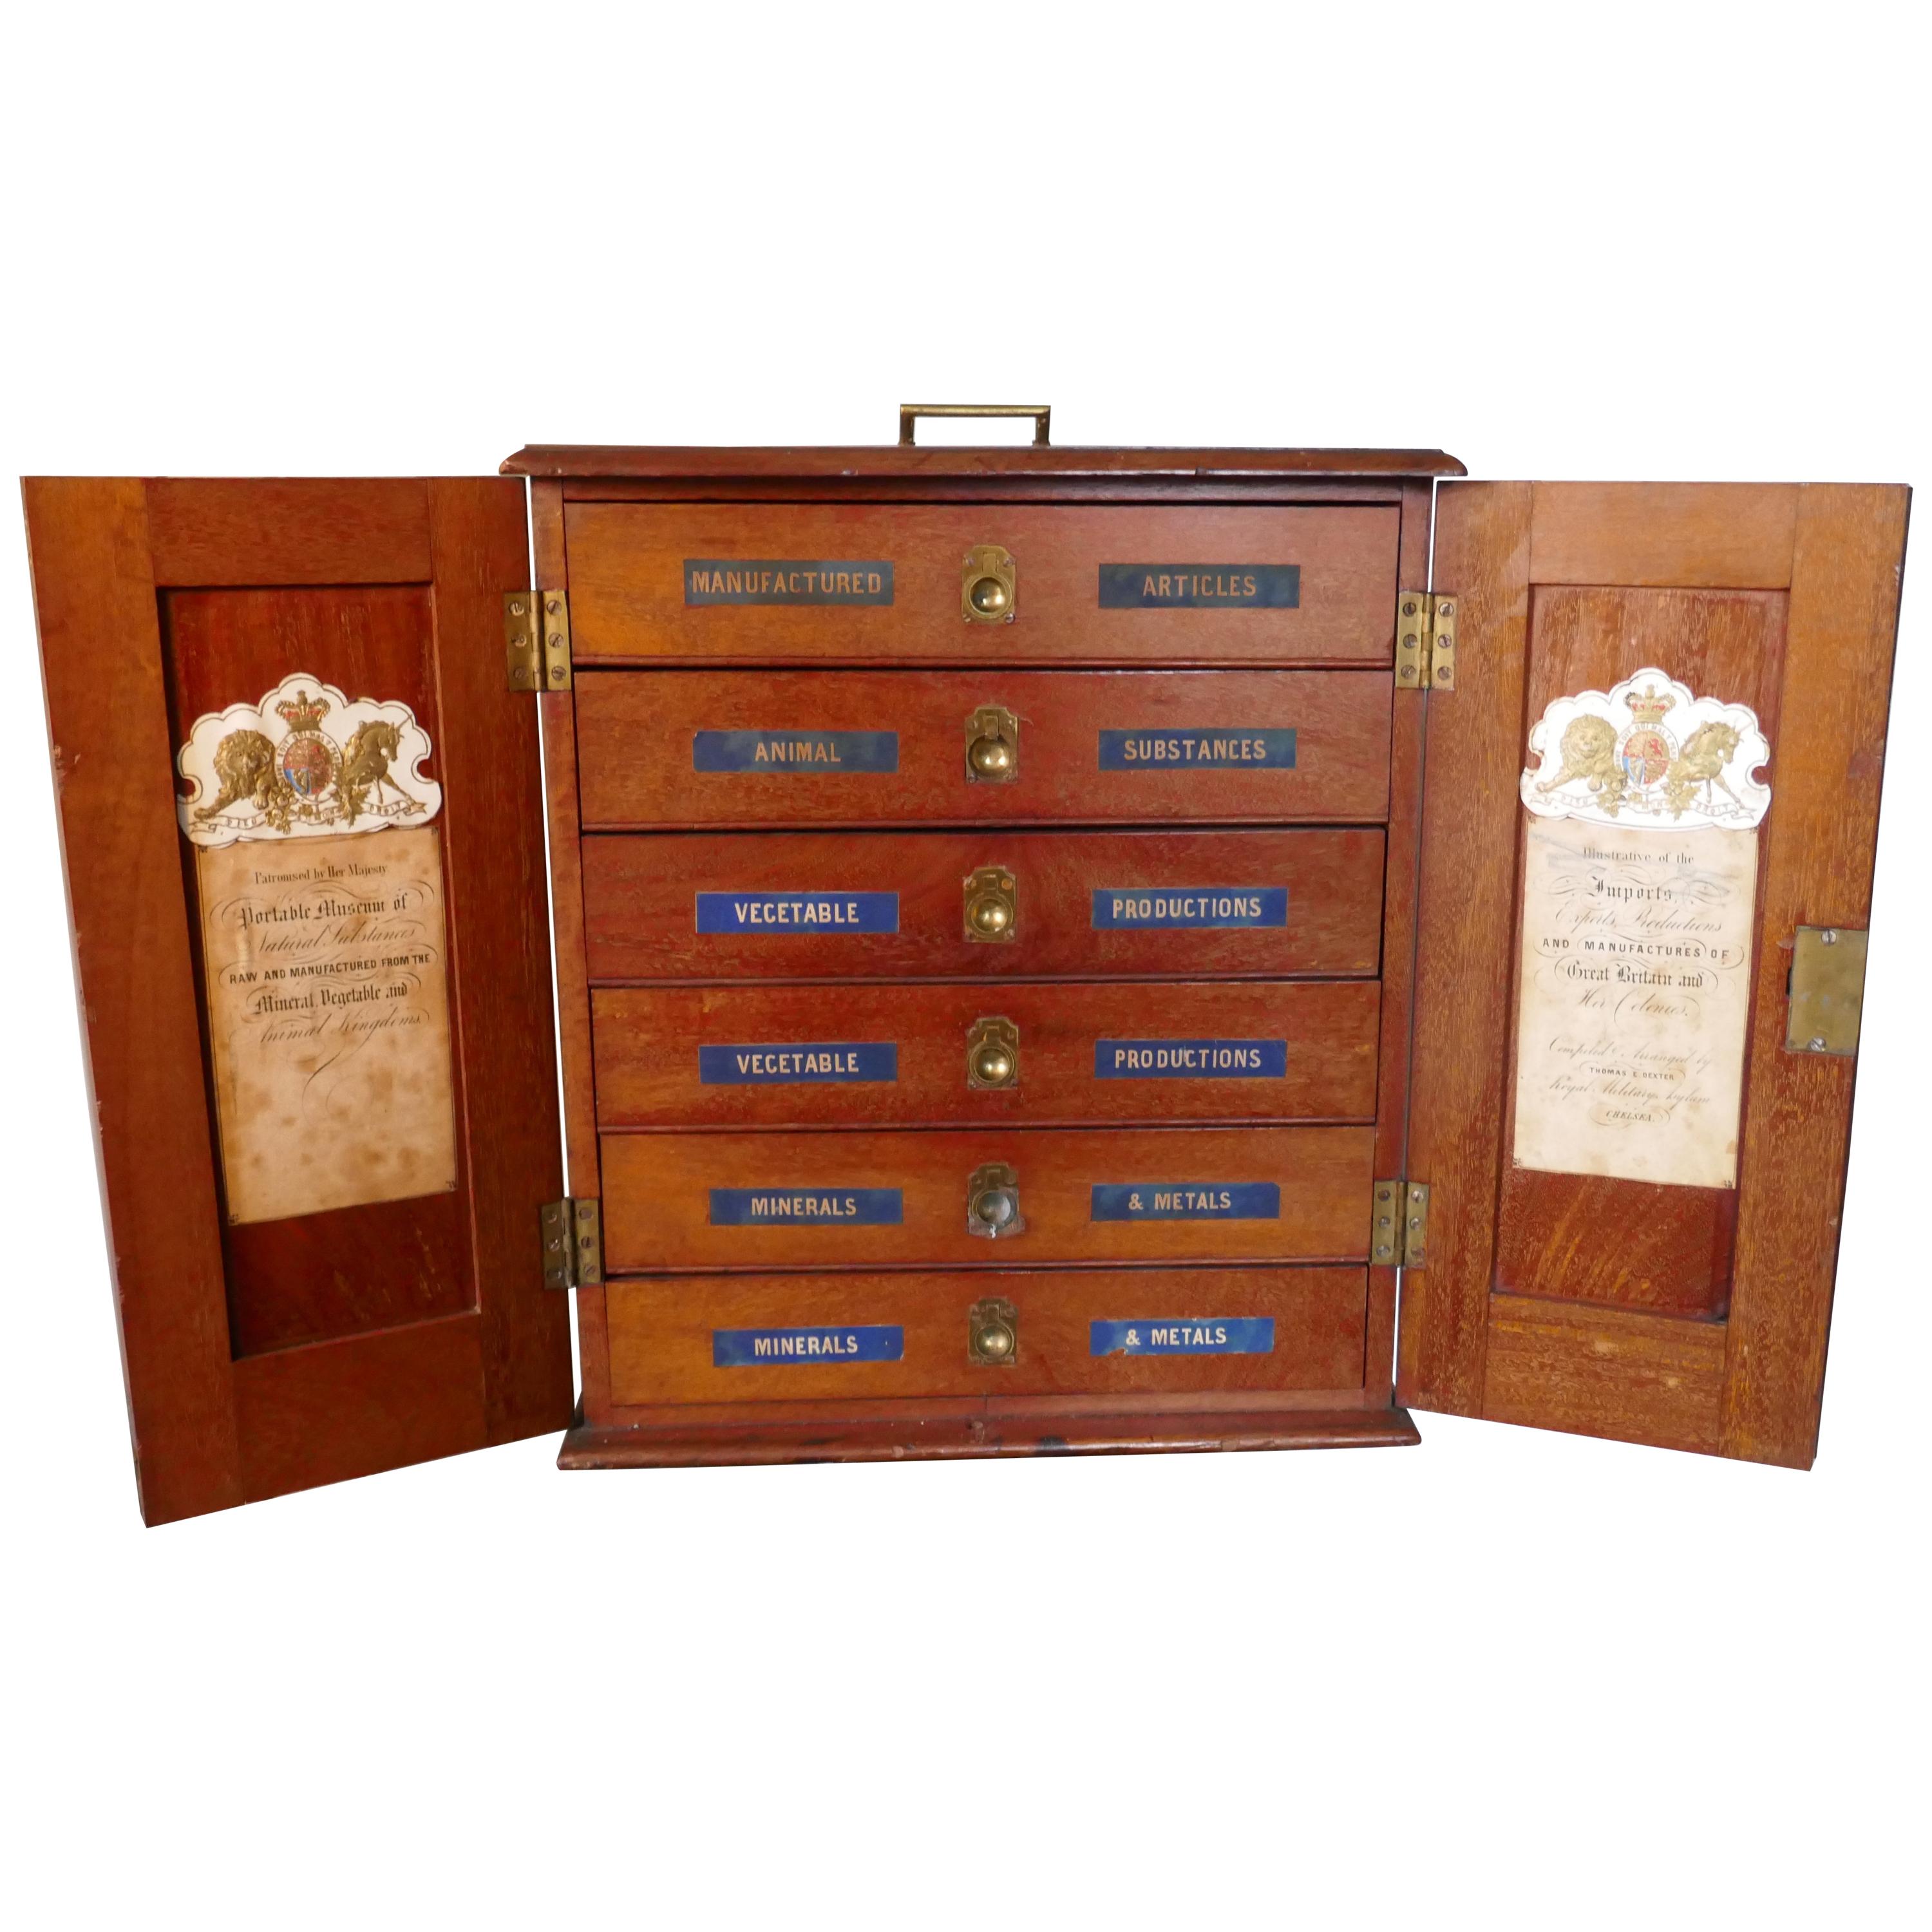 Victorian Collectors Cabinet, “Portable Museum” with Contents